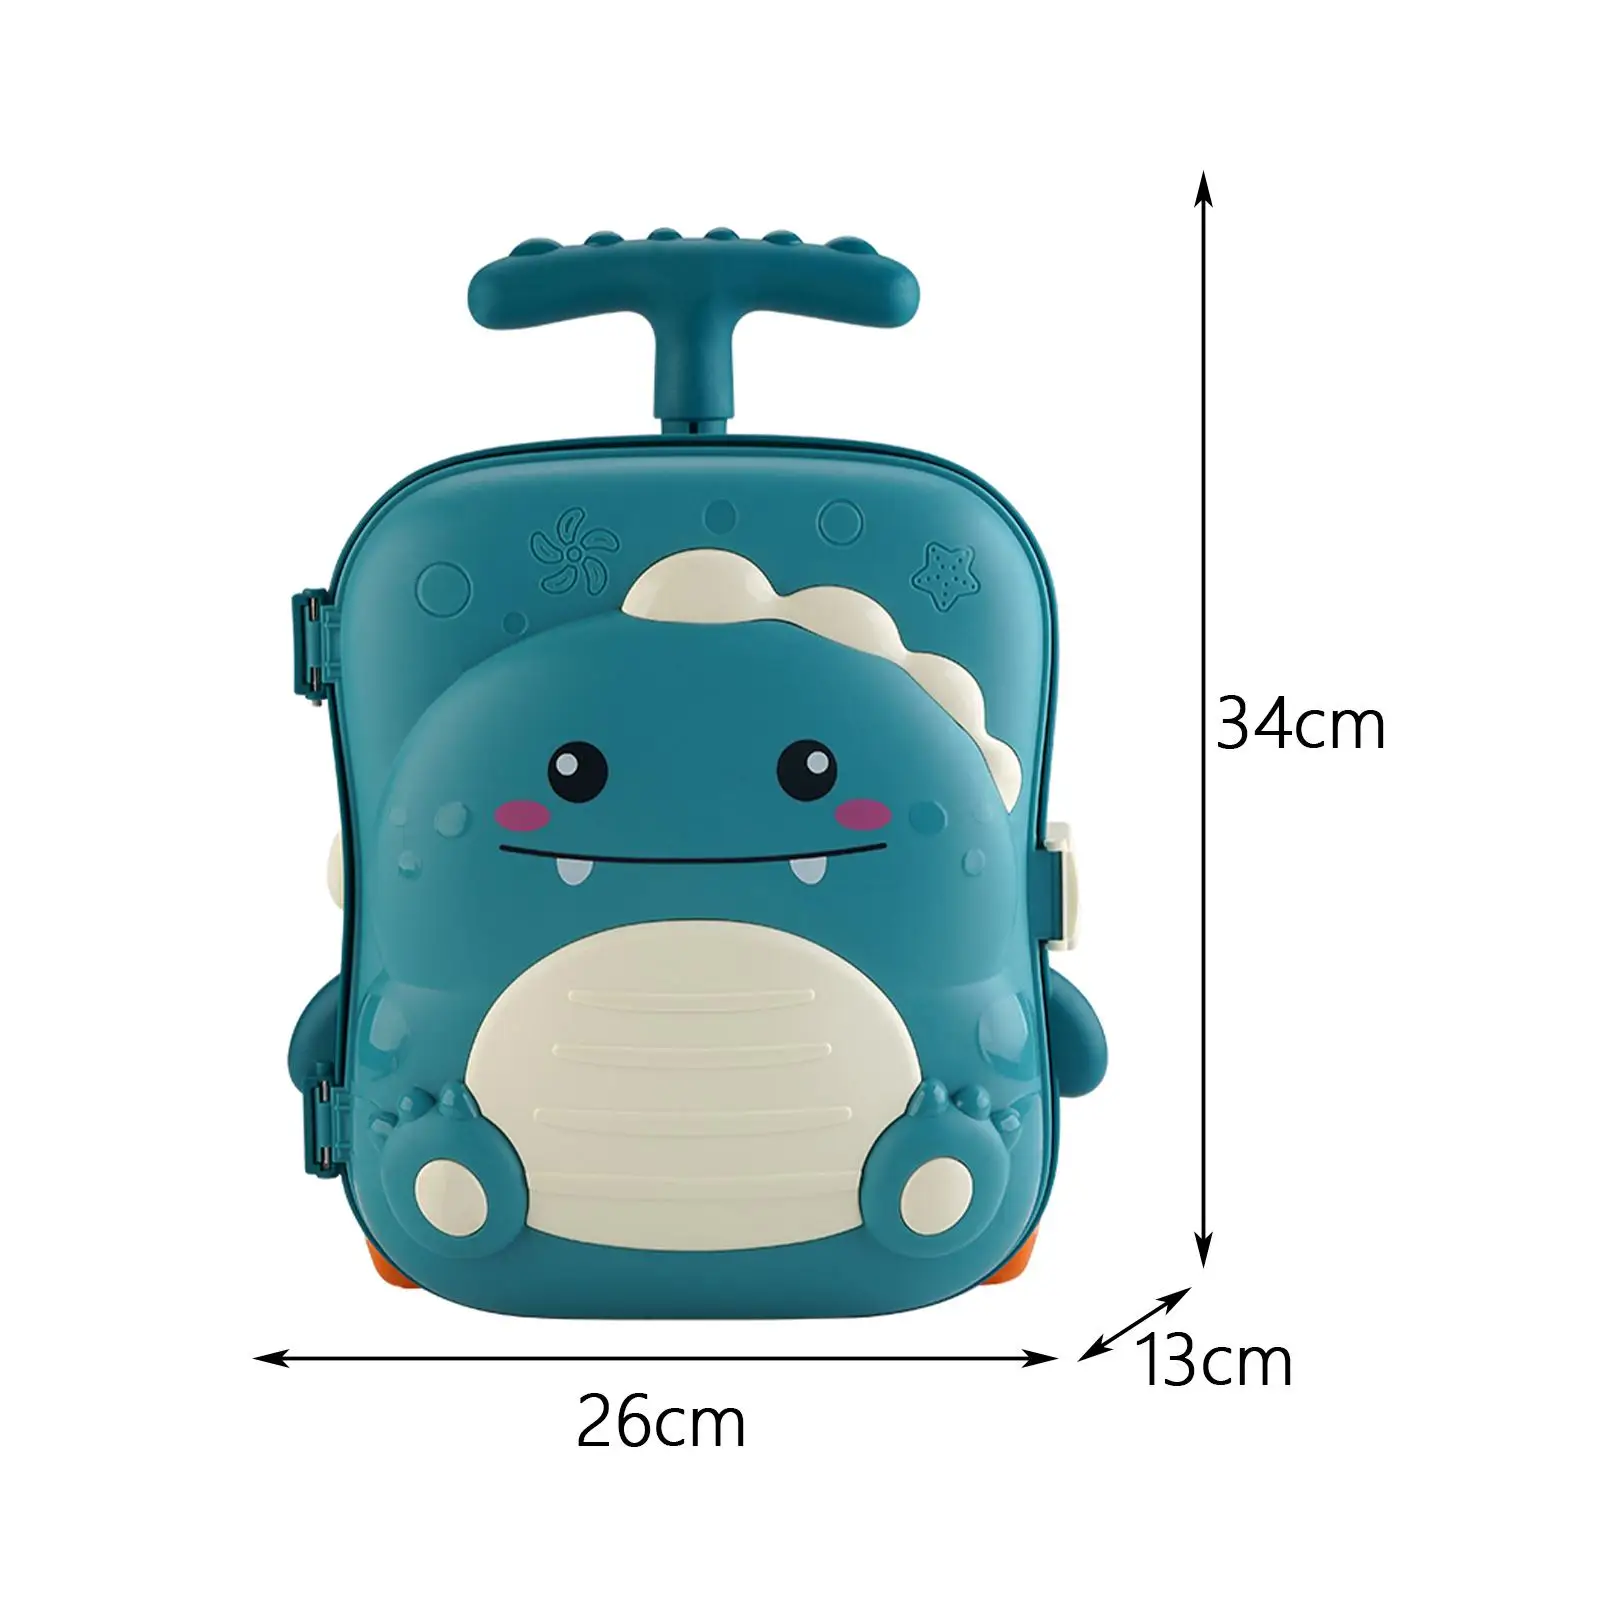 Sand Toy Bath Toys Outdoor Activities Toys Kids Outdoor Toys Sand Toys Beach Set for Sandpit Travel Outdoor Seaside Pools